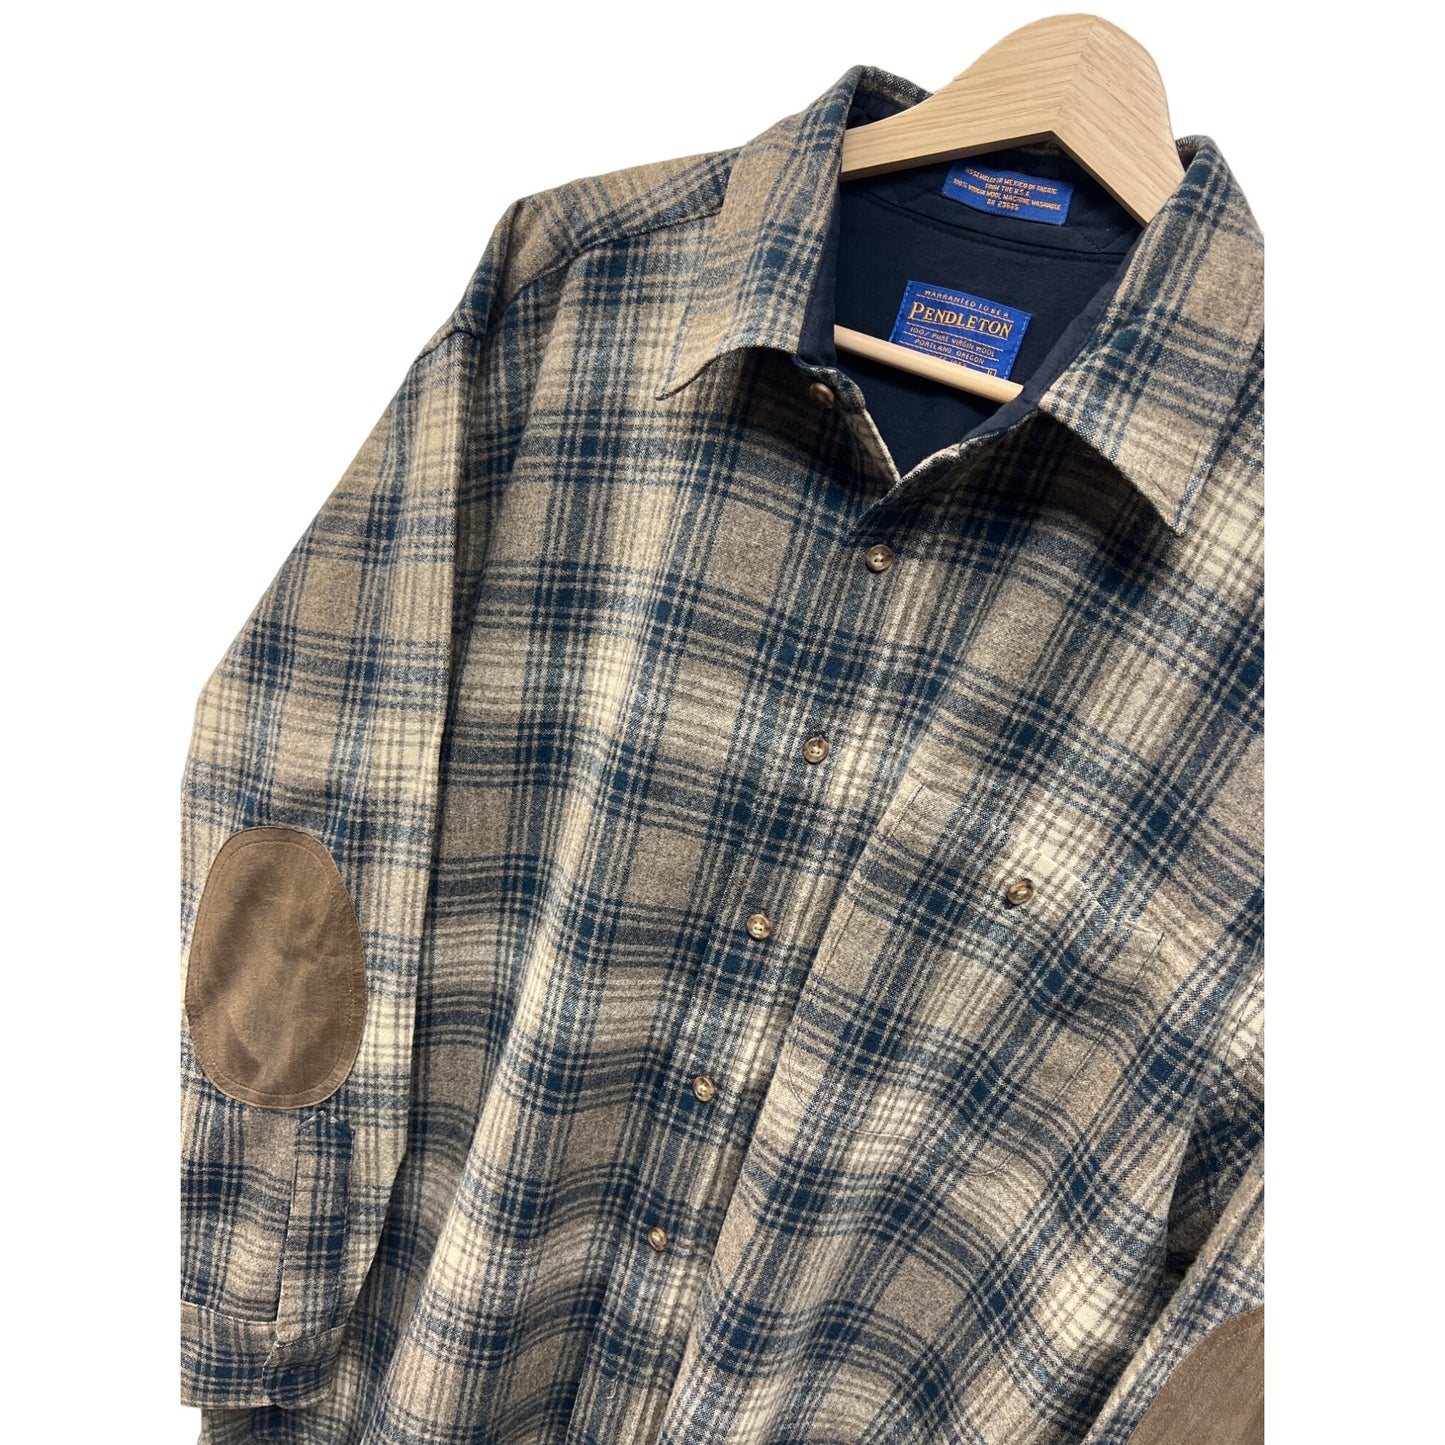 Pendleton Vintage Blue and Tan Wool Flannel Board Shirt with Elbow Patches